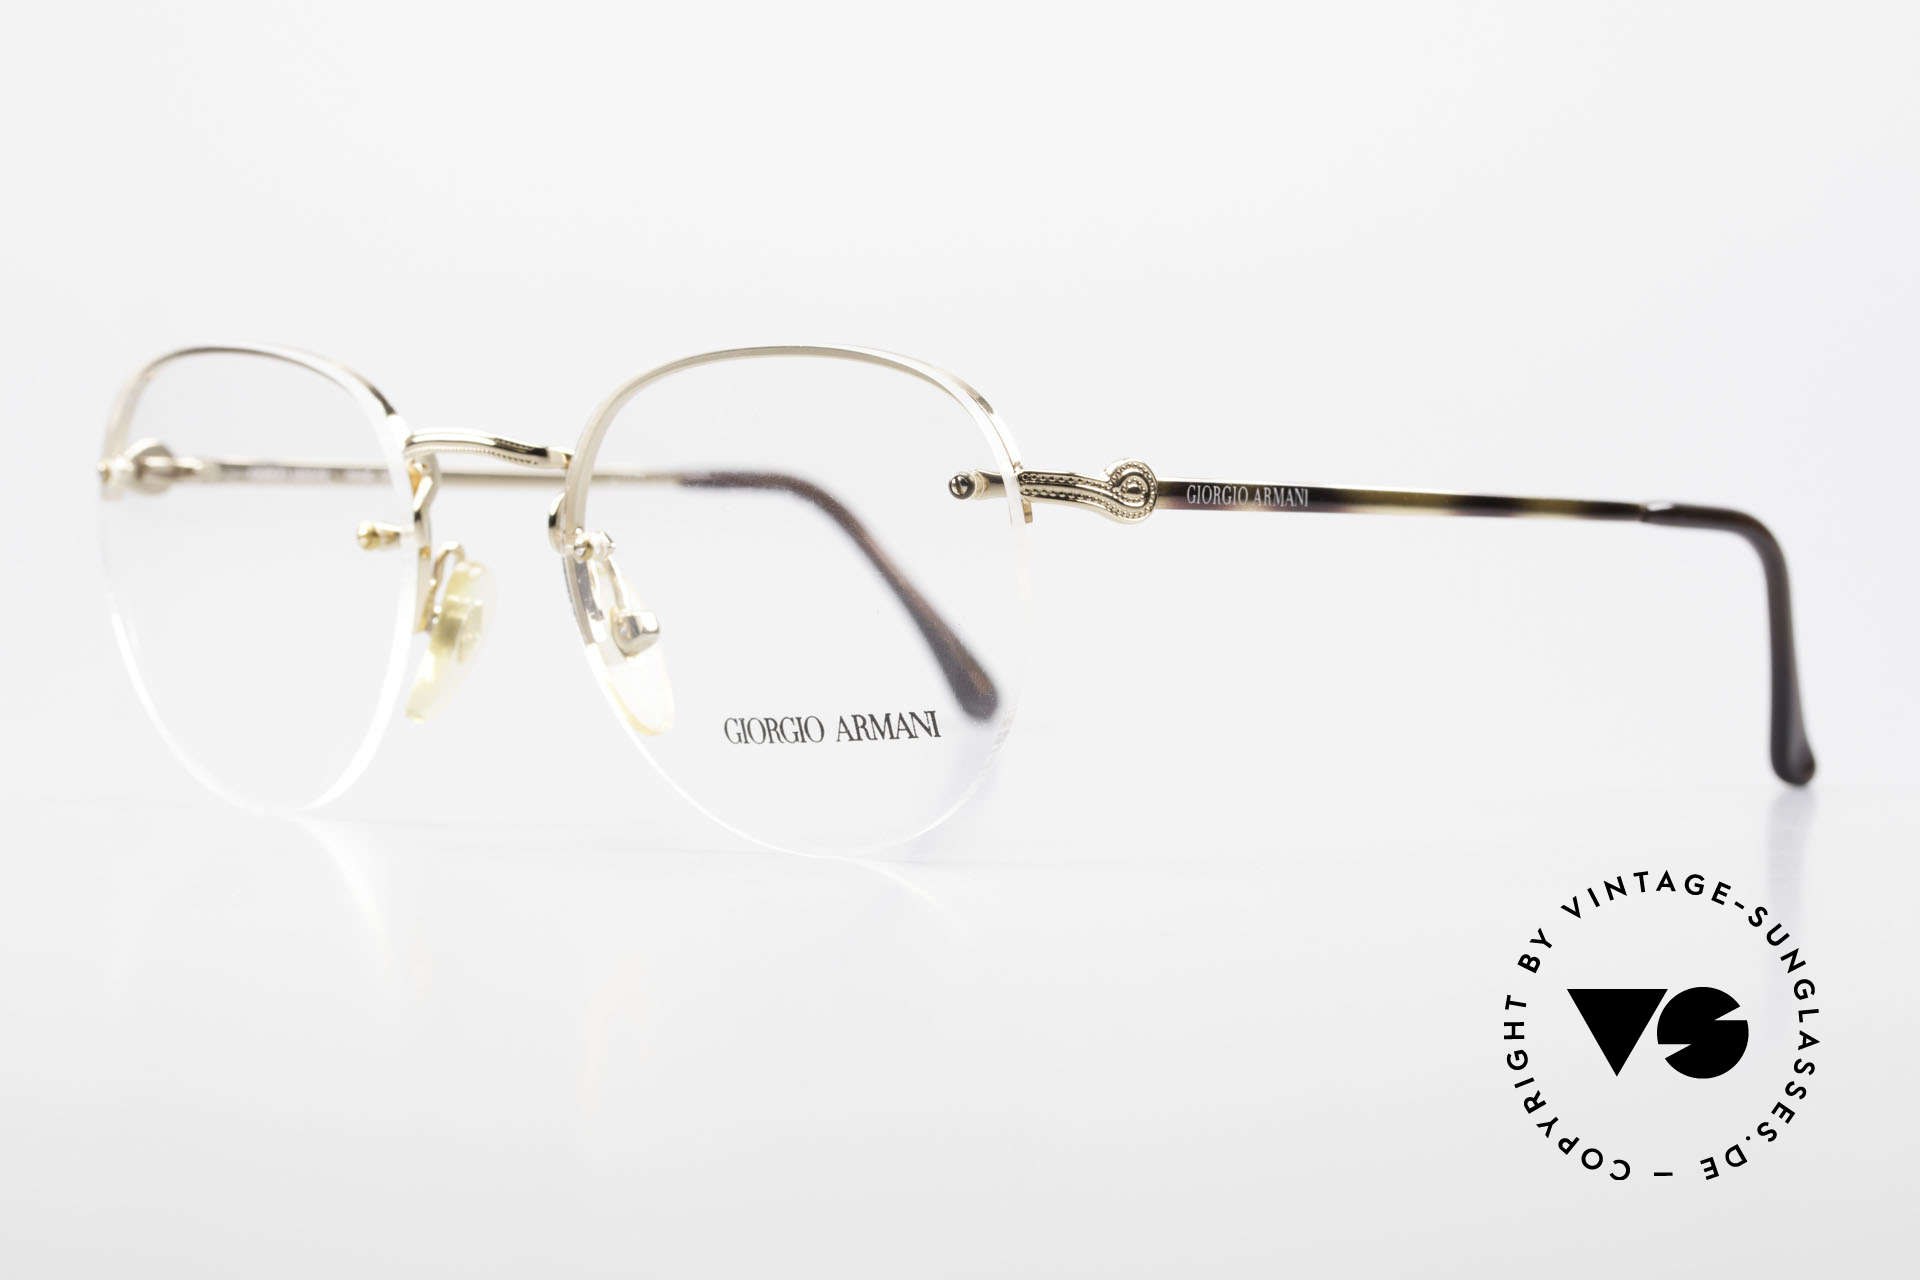 Giorgio Armani 161 Rimless Vintage Eyeglasses 80s, demo lenses are fixed with screws on the metal frame, Made for Men and Women